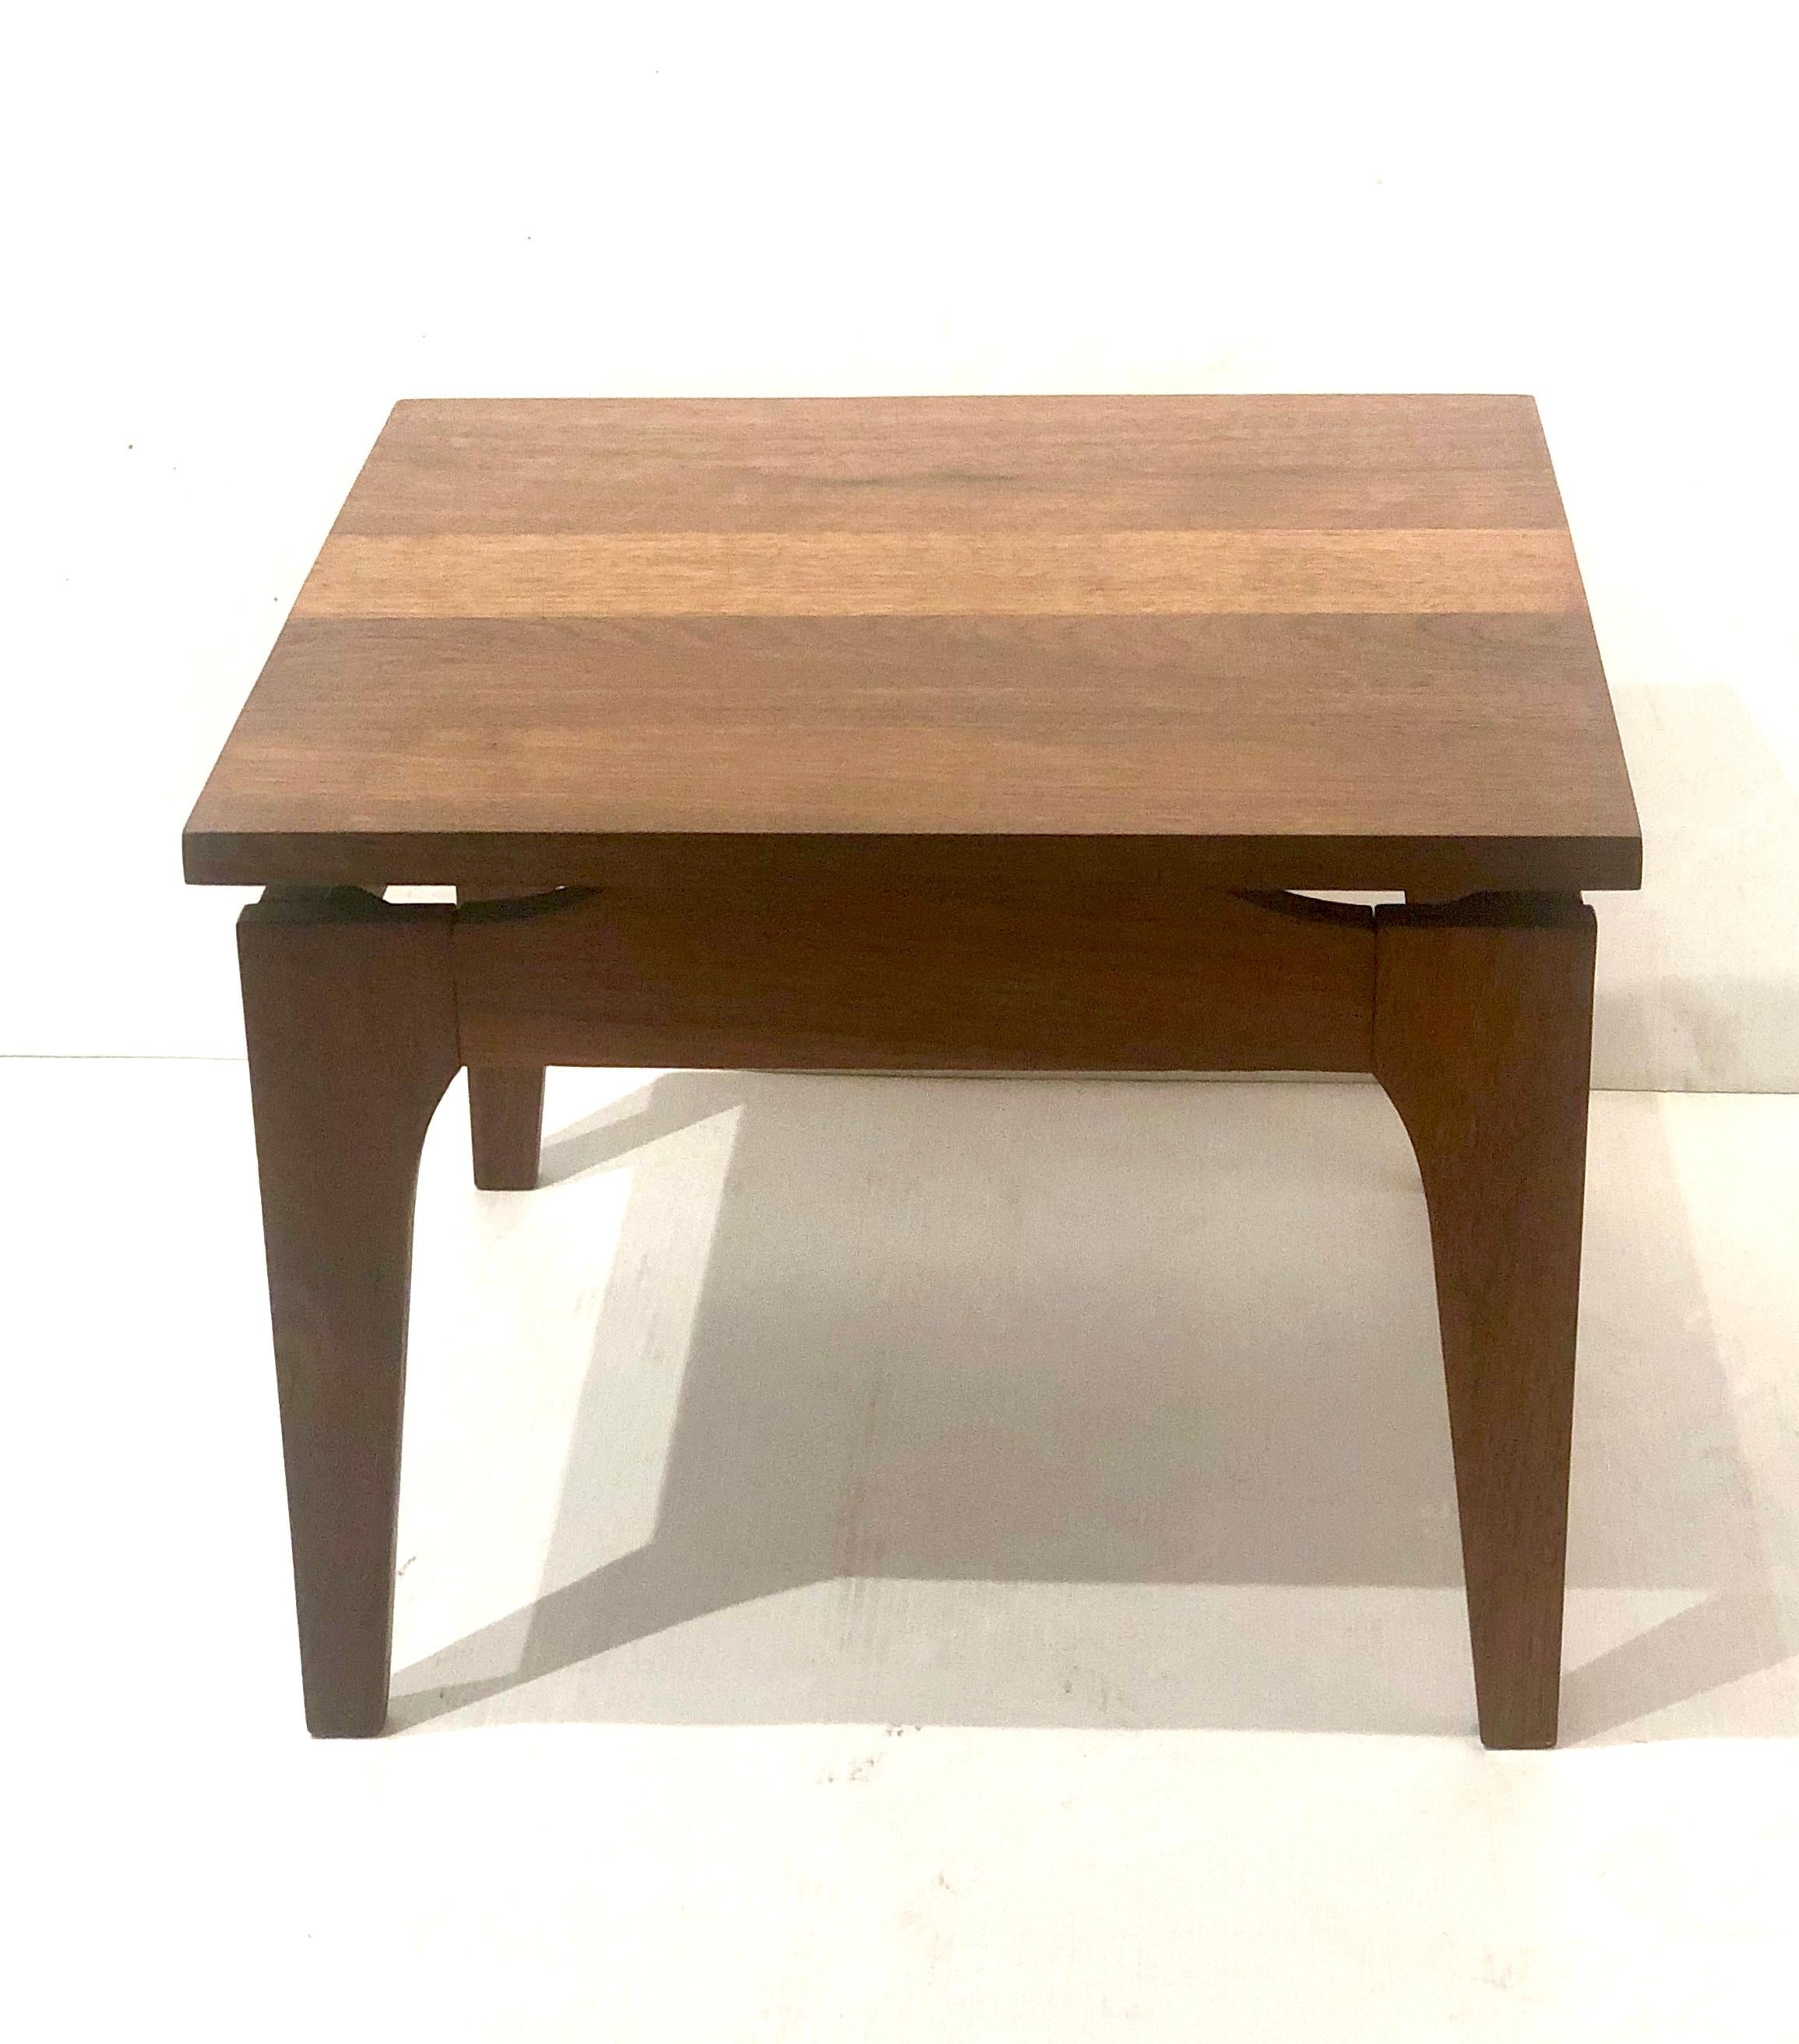 Simple elegant solid midcentury end cocktail table, in the style of Jens Risom, circa 1950s solid and sturdy freshly refinished this table can be used between 2 chairs or next to a sofa, great craftsmanship and quality . With a floating top.